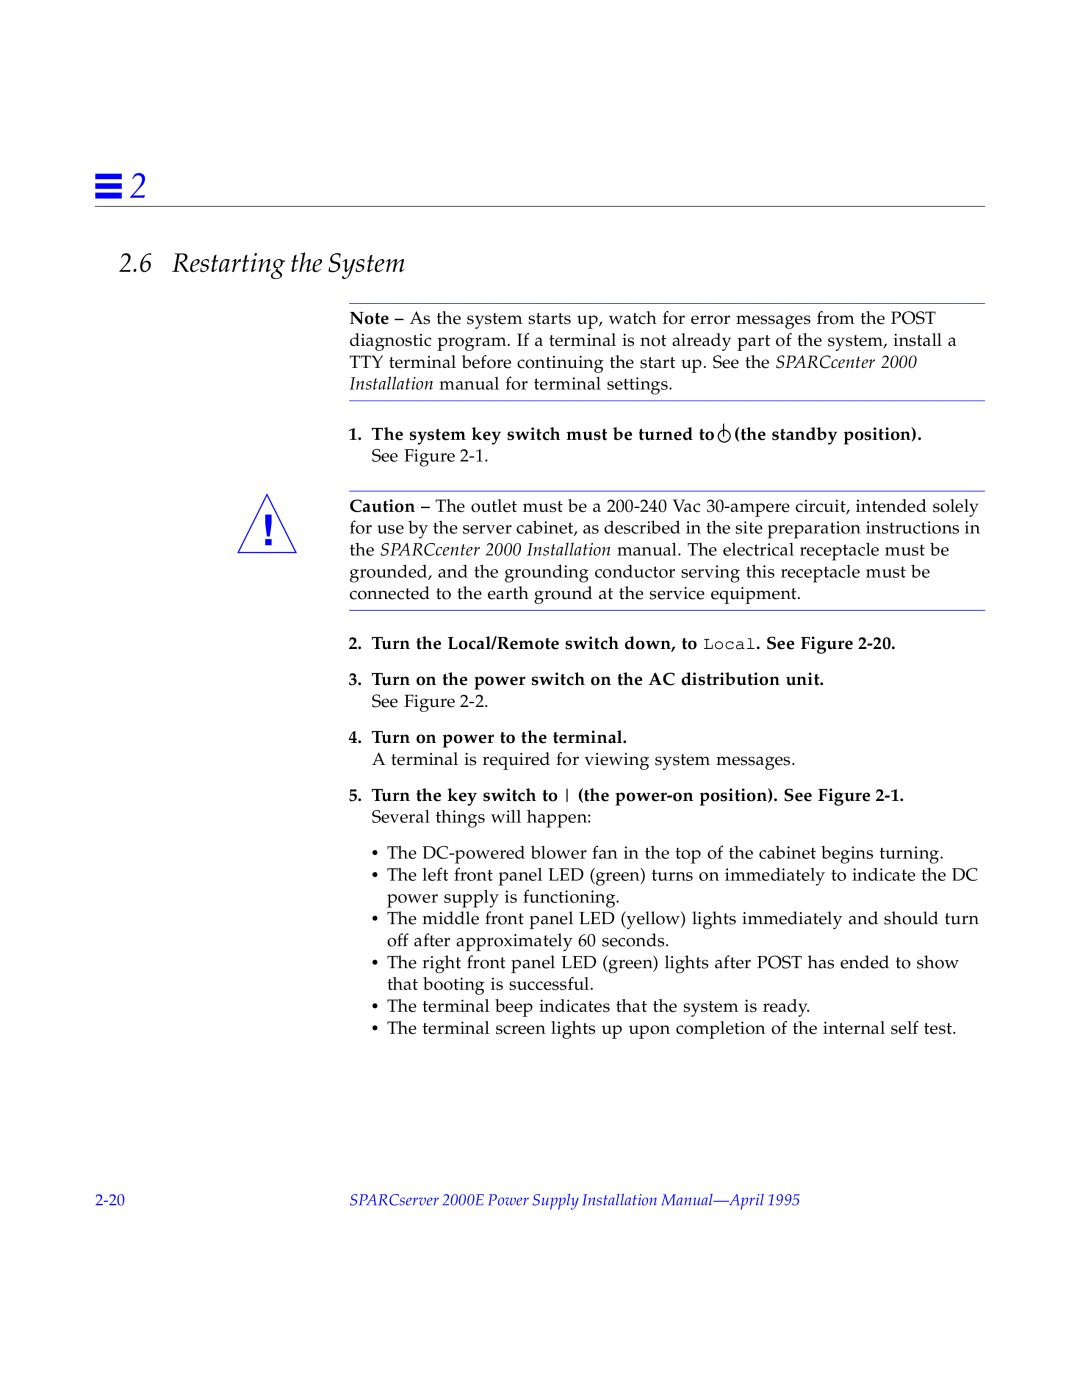 Sun Microsystems 2000E installation manual Restarting the System, Turn the Local/Remote switch down, to Local. See Figure 